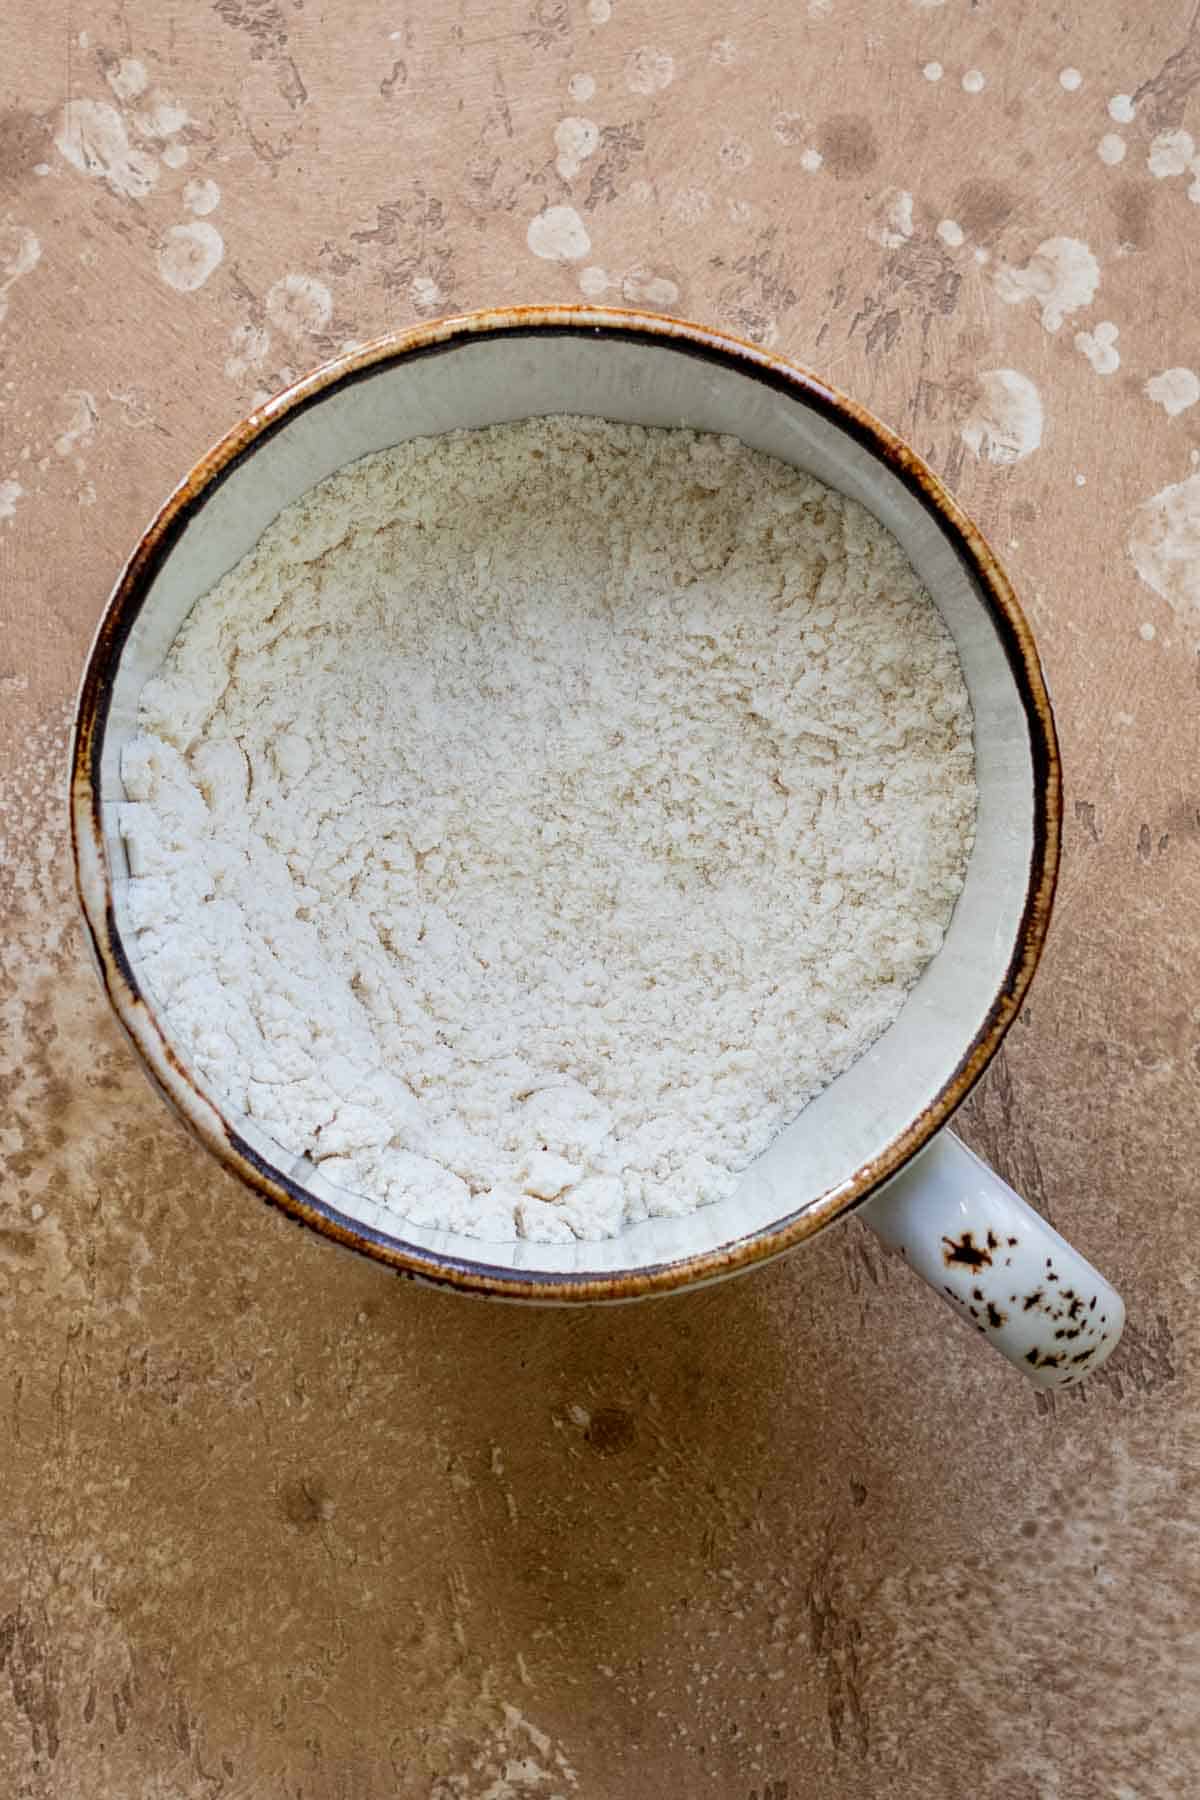 Dry ingredients mixed together in mug.